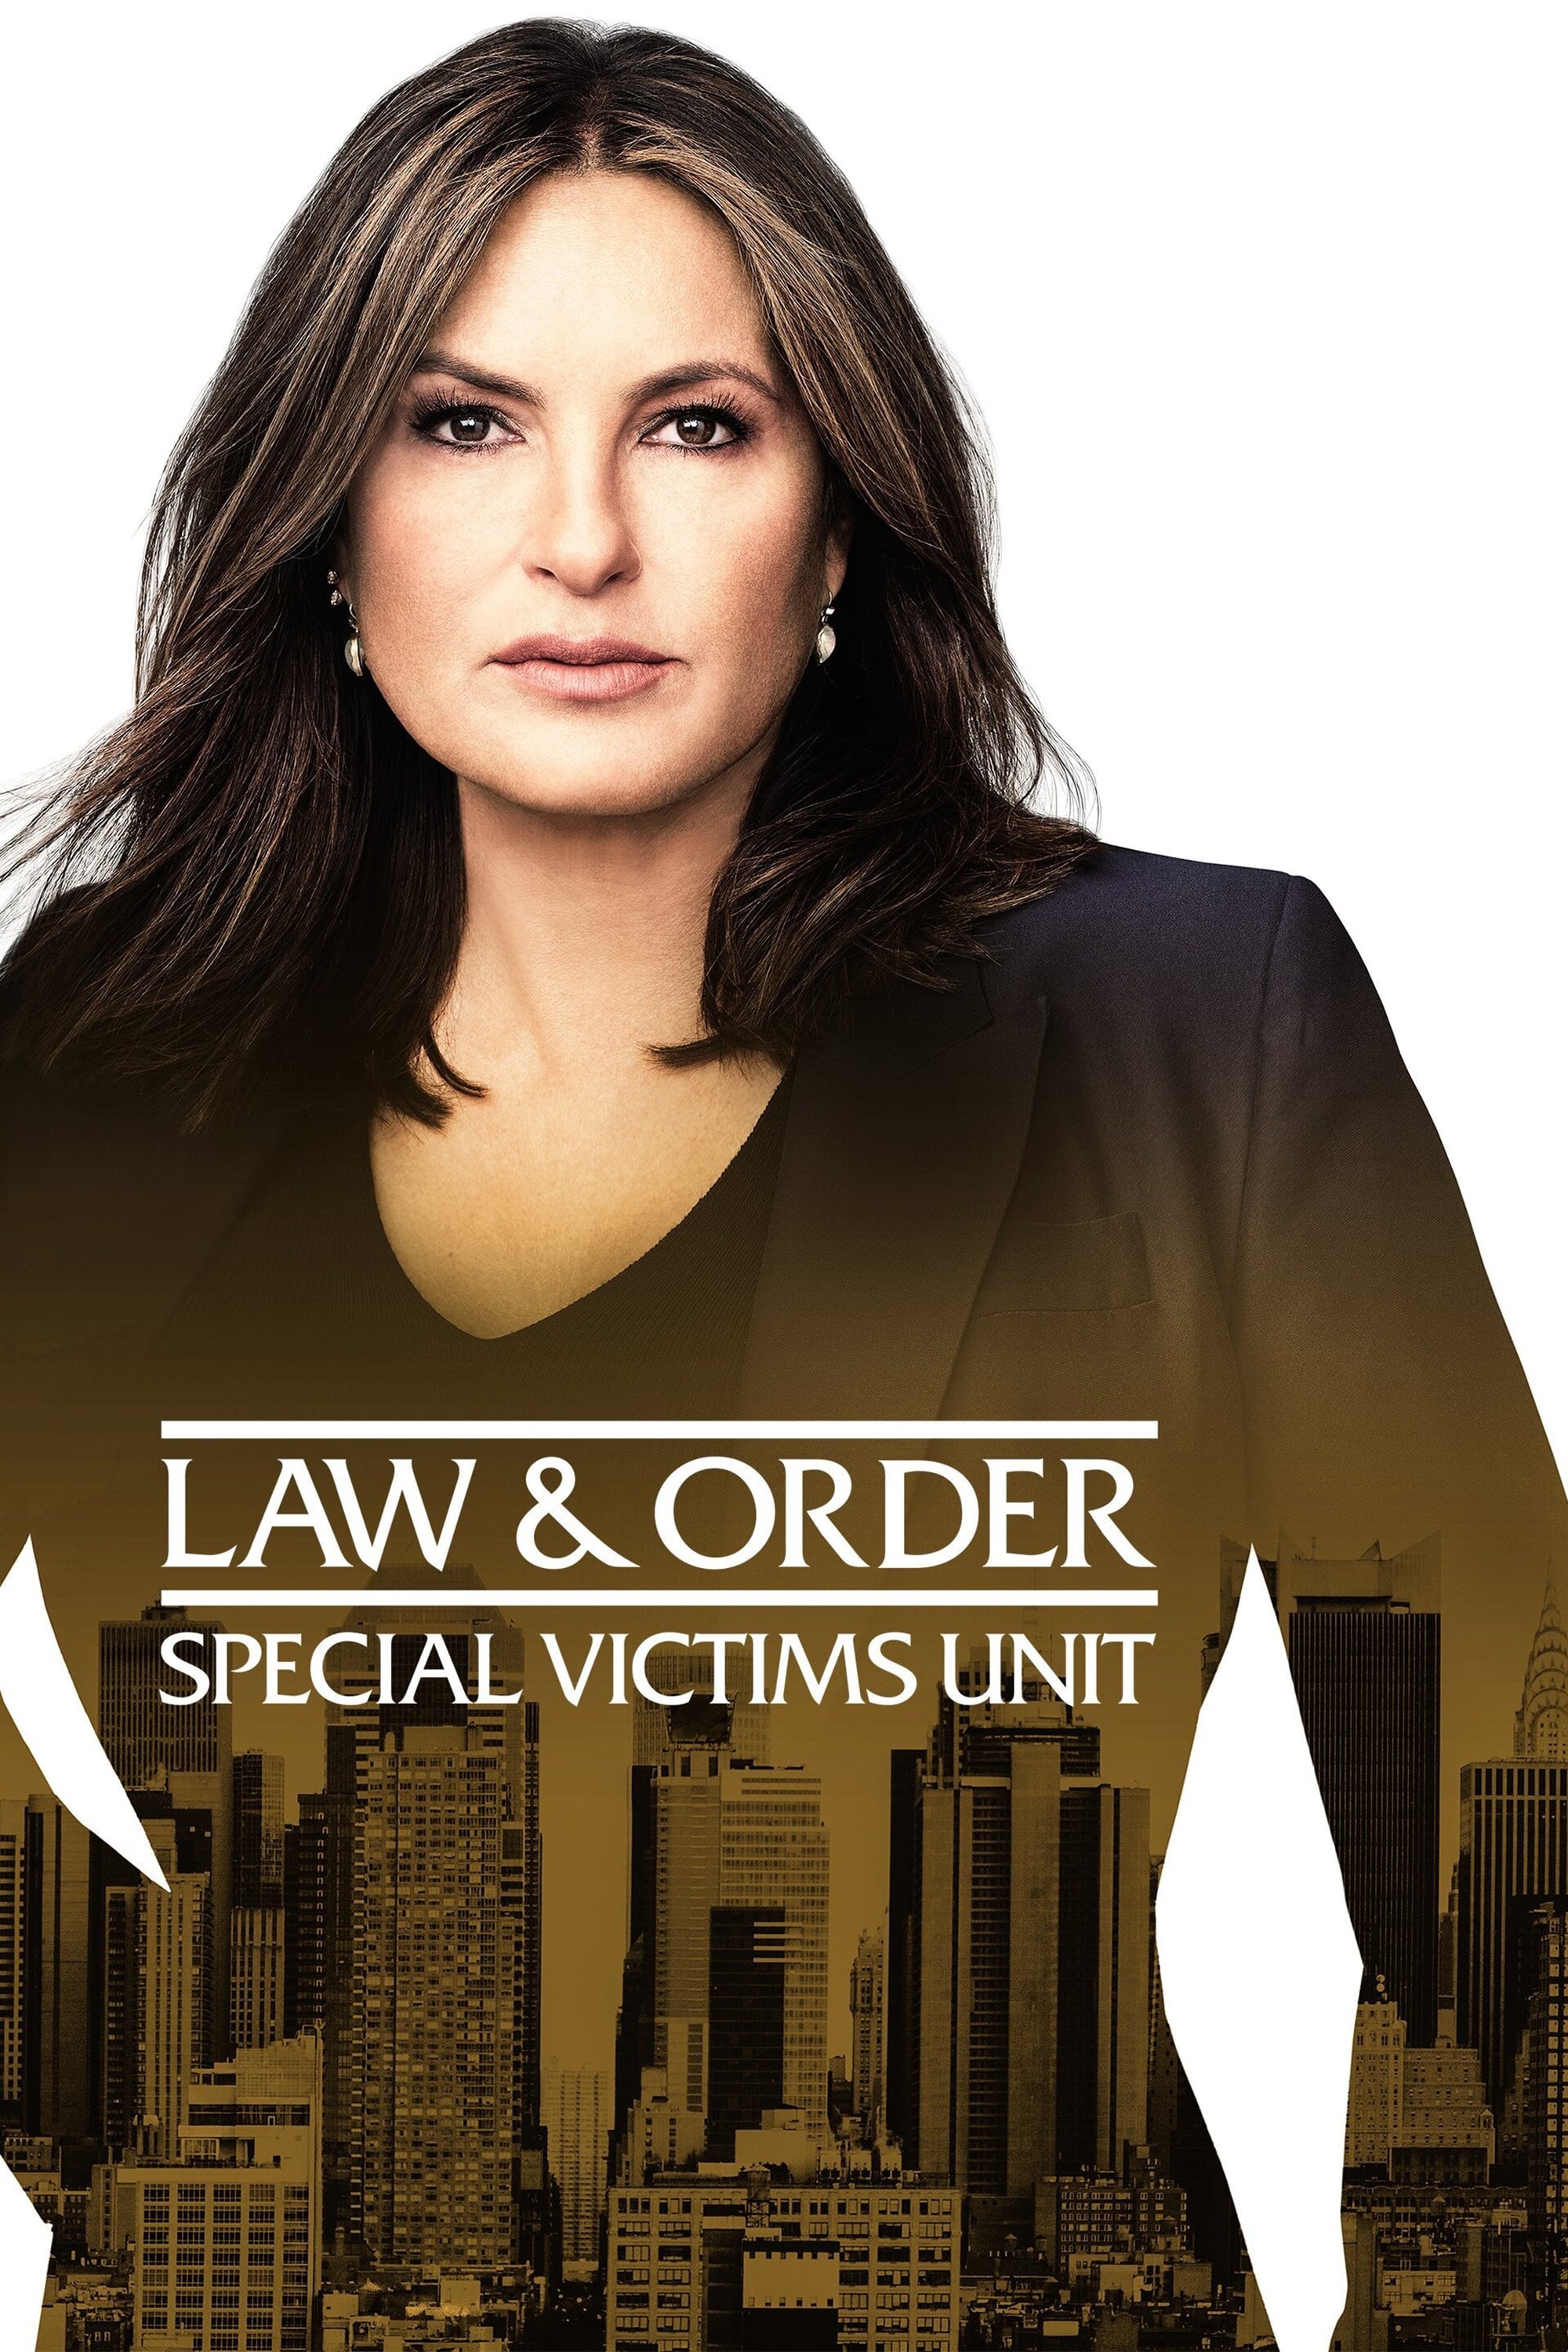 Law & Order: Special Victims Unit TV Shows About Sexual Violence